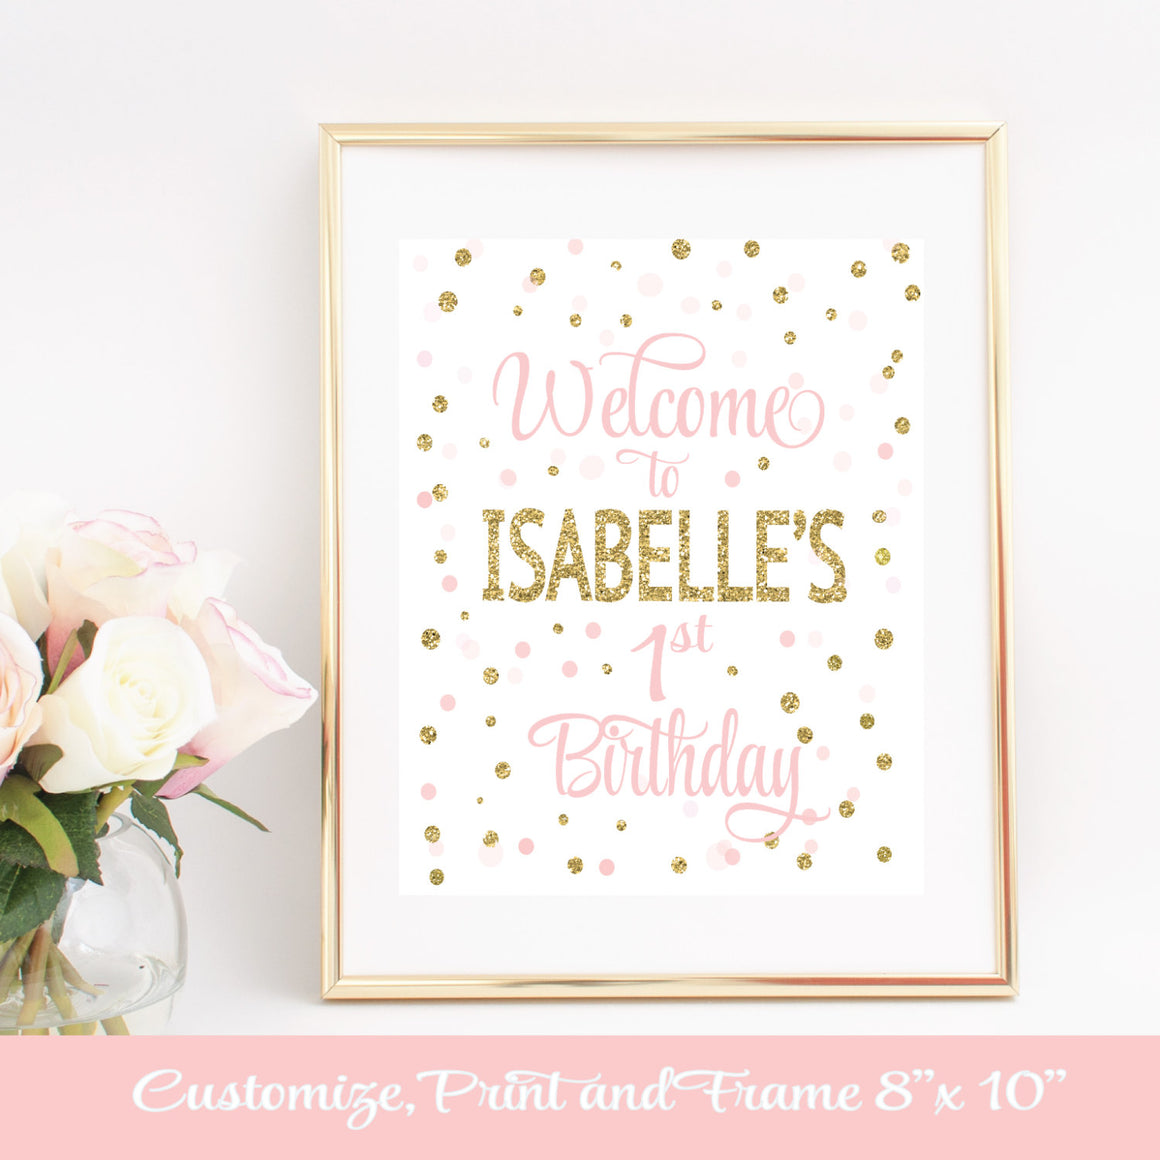 customize, print and frame 8 x 10 inch Welcome to Isabelle's 1st Birthday downloadable print